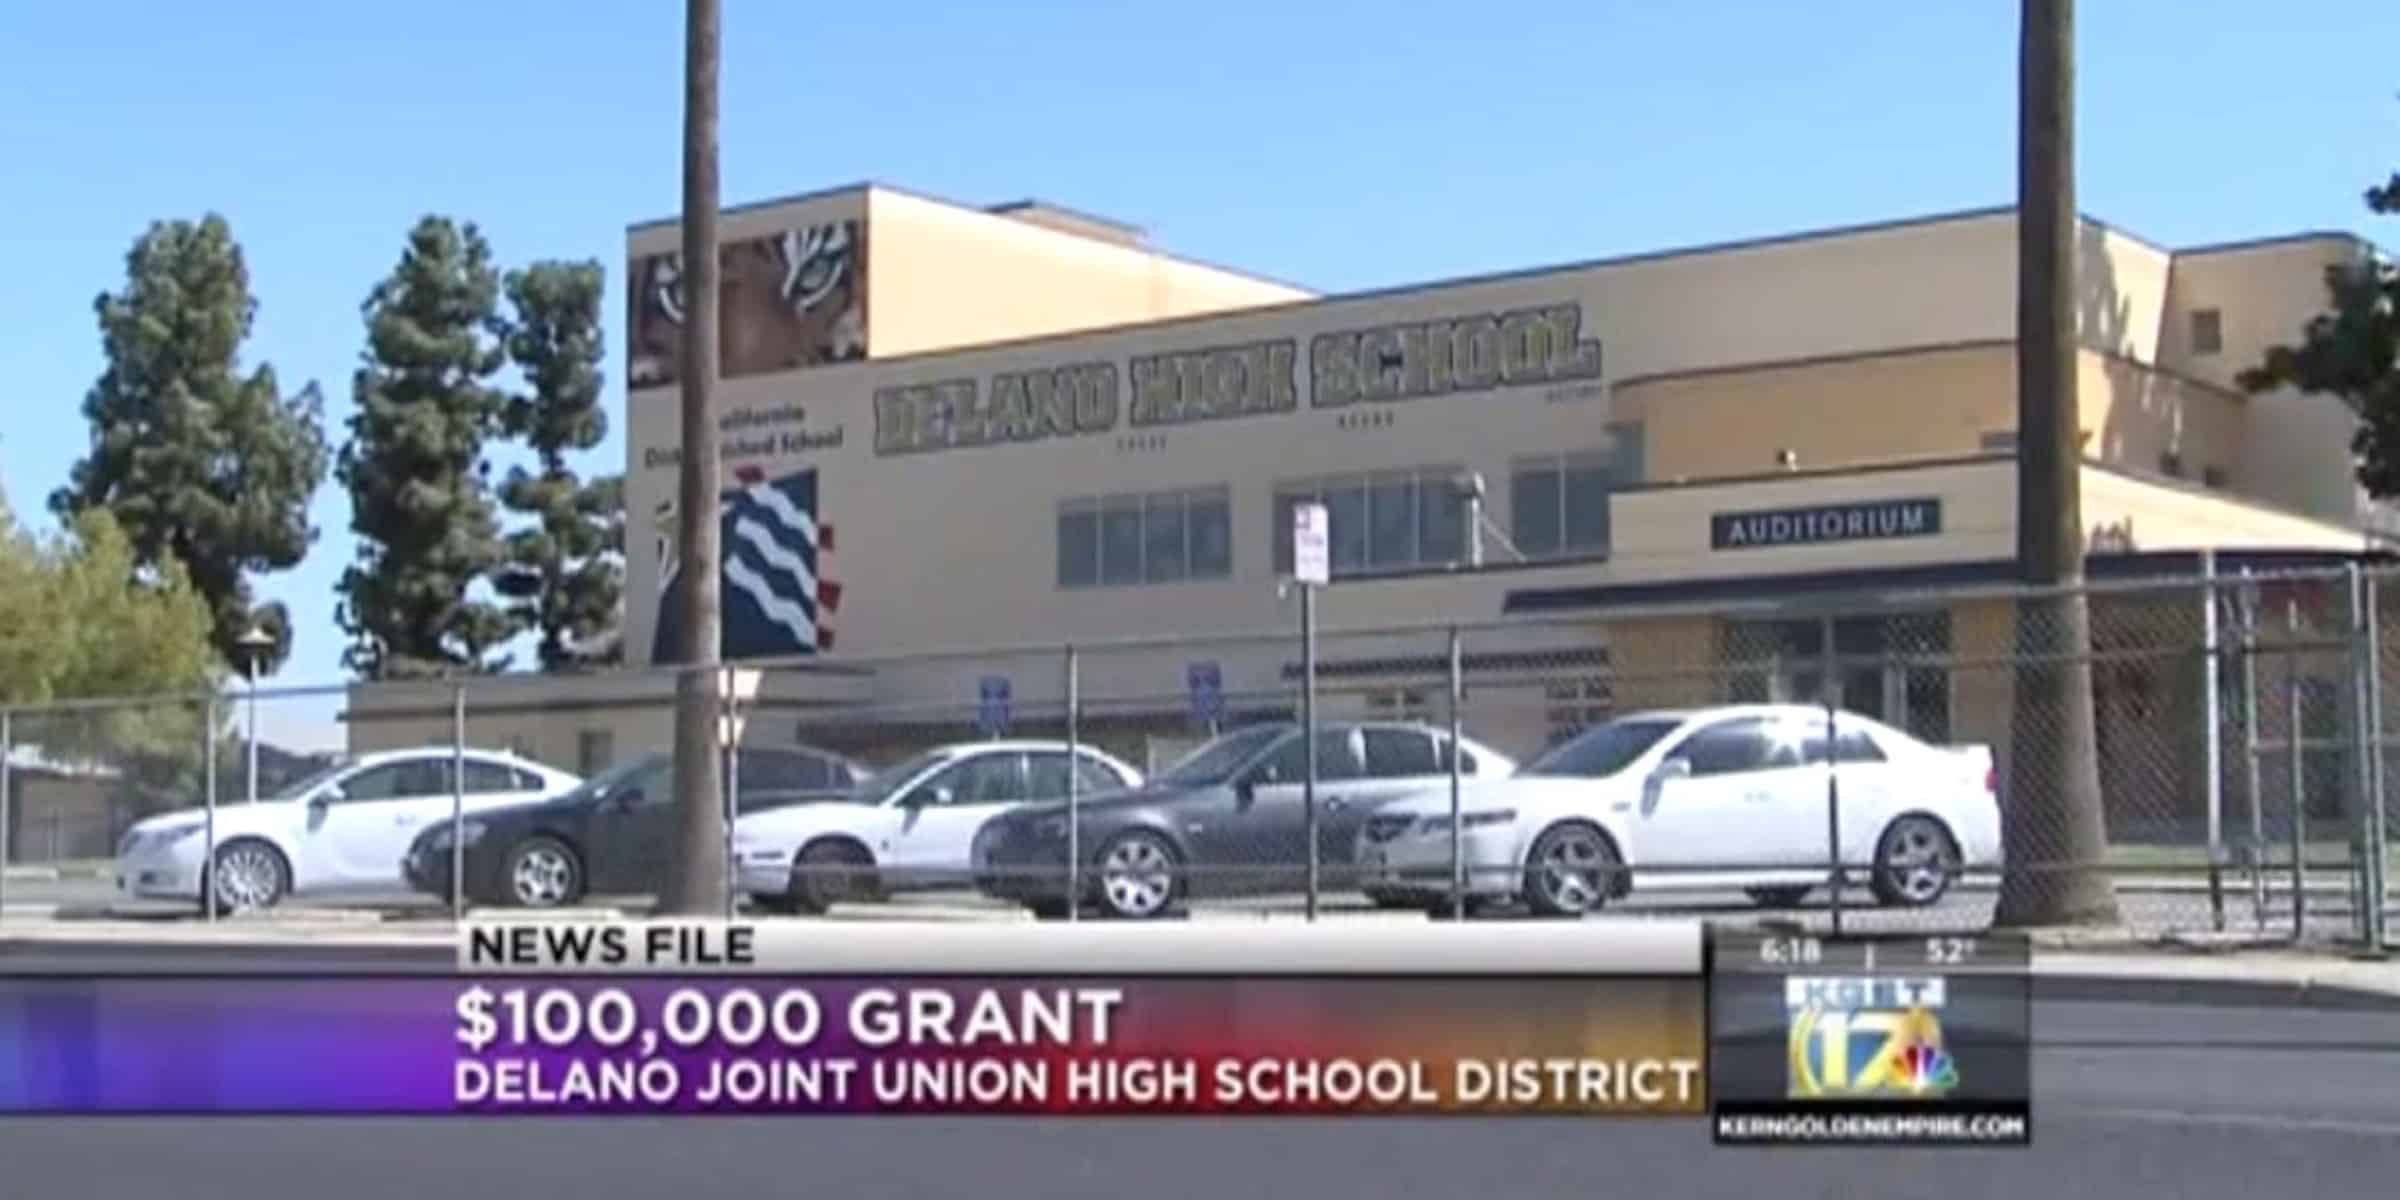 Attorney Neil Gehlawat, father give Delano high schools funding boost with generous donation